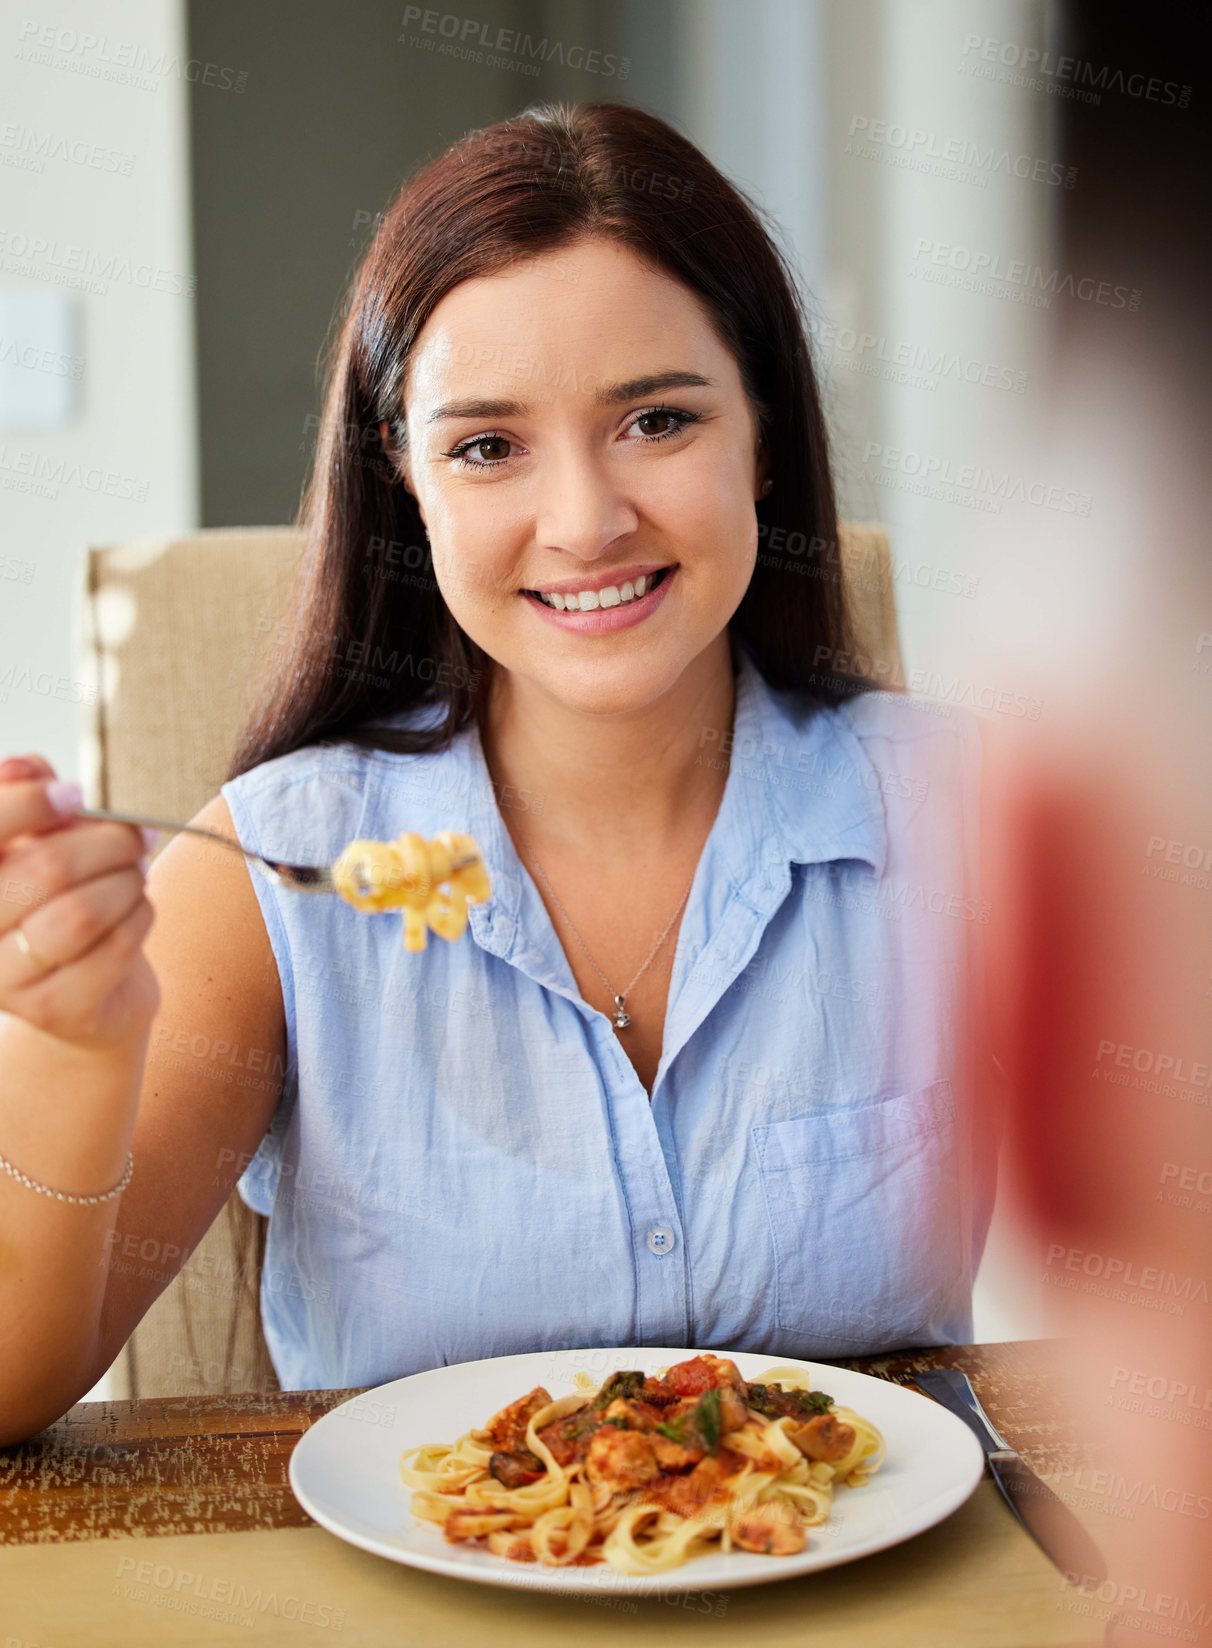 Buy stock photo Shot of a young woman sitting down to eat at home